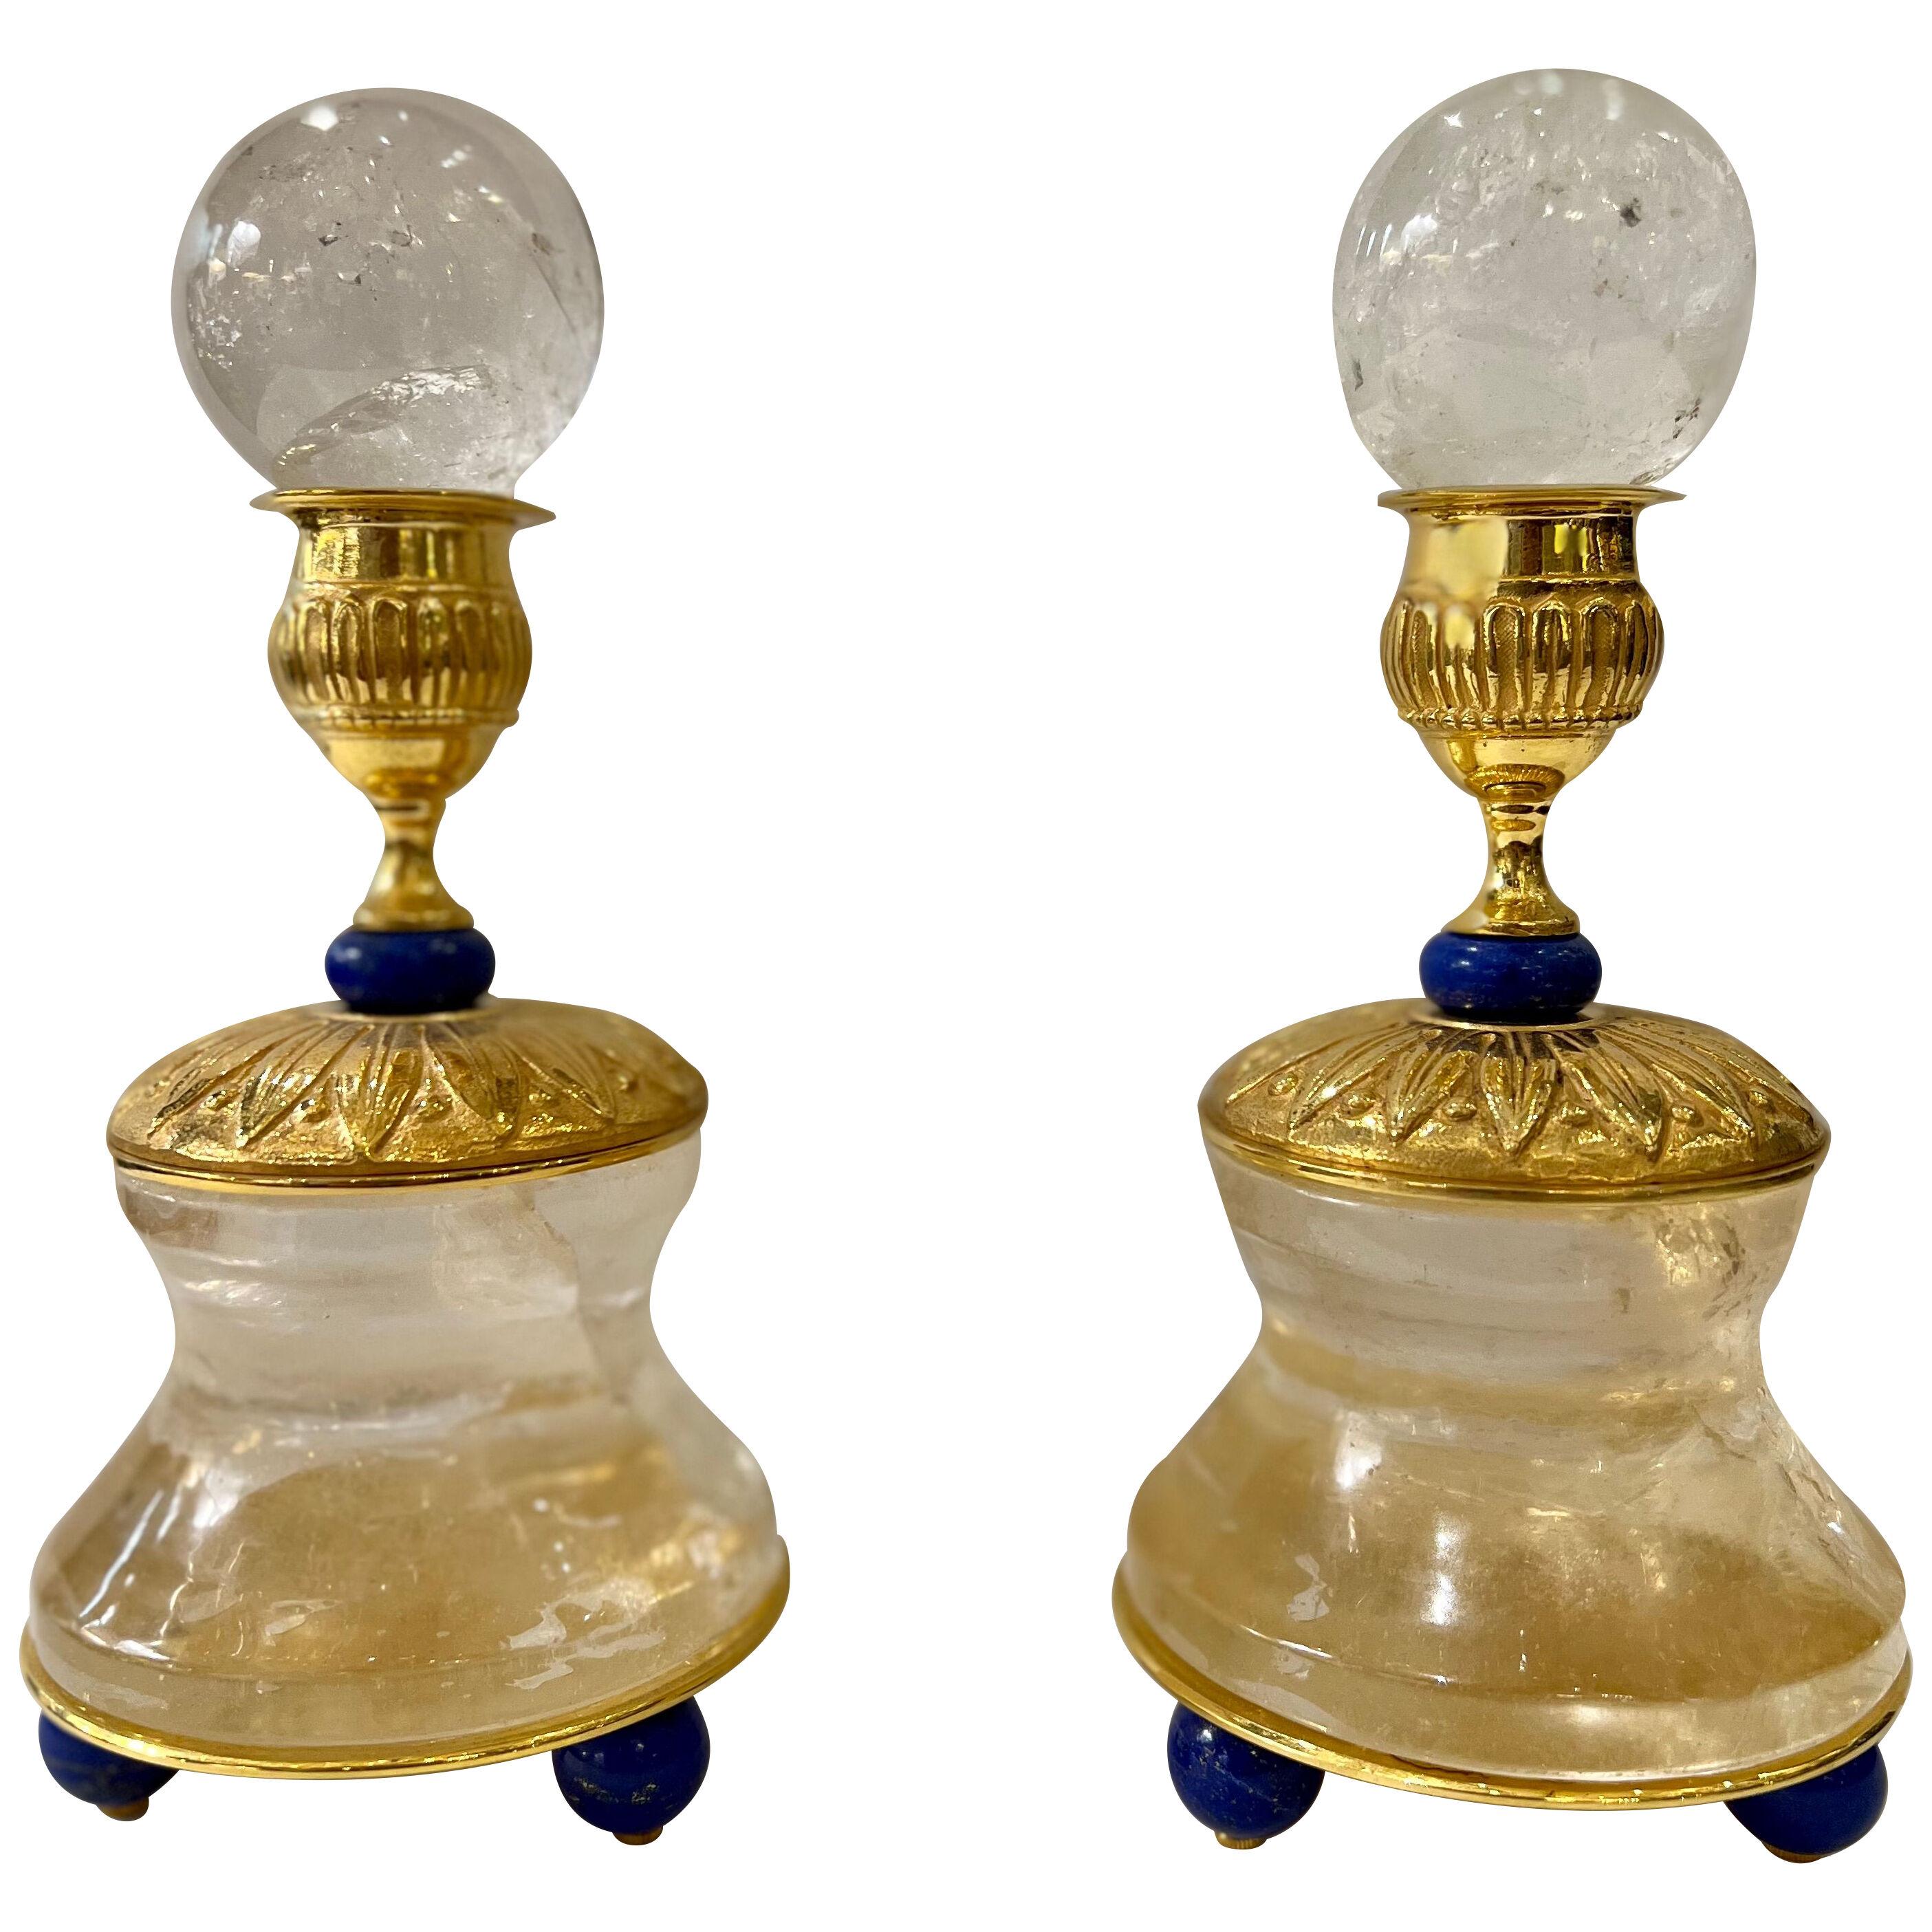 Pair of Rock Crystal and 24 K Gold Plated Bronze Support Spheres Holdlers